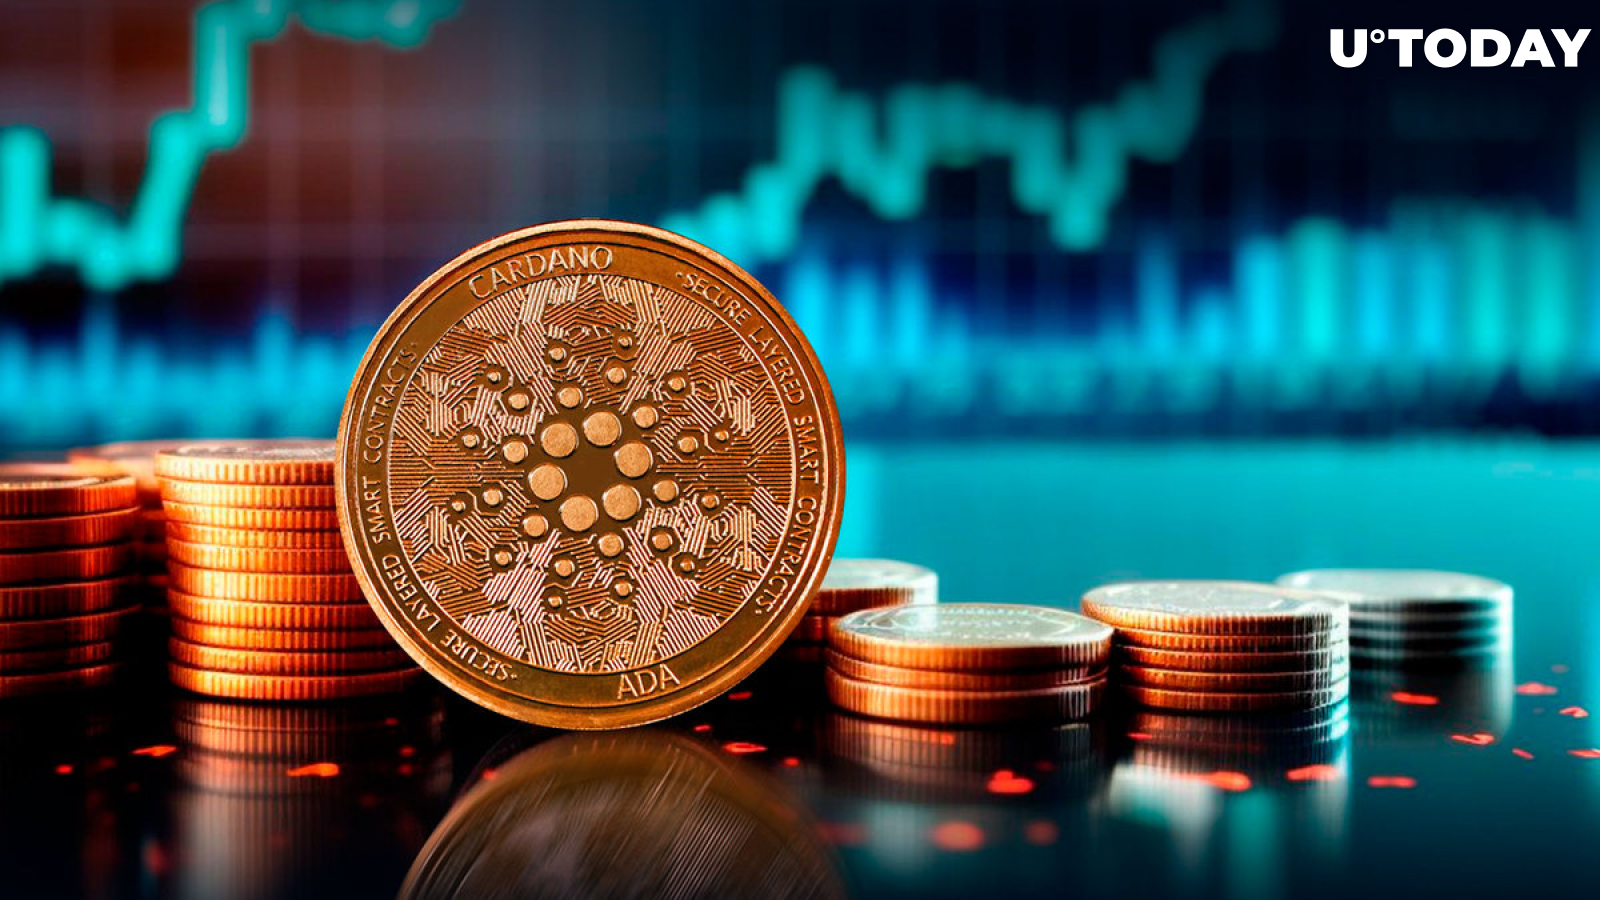 Cardano Soars 94% in Volume as ADA Price Reaches Crucial Point